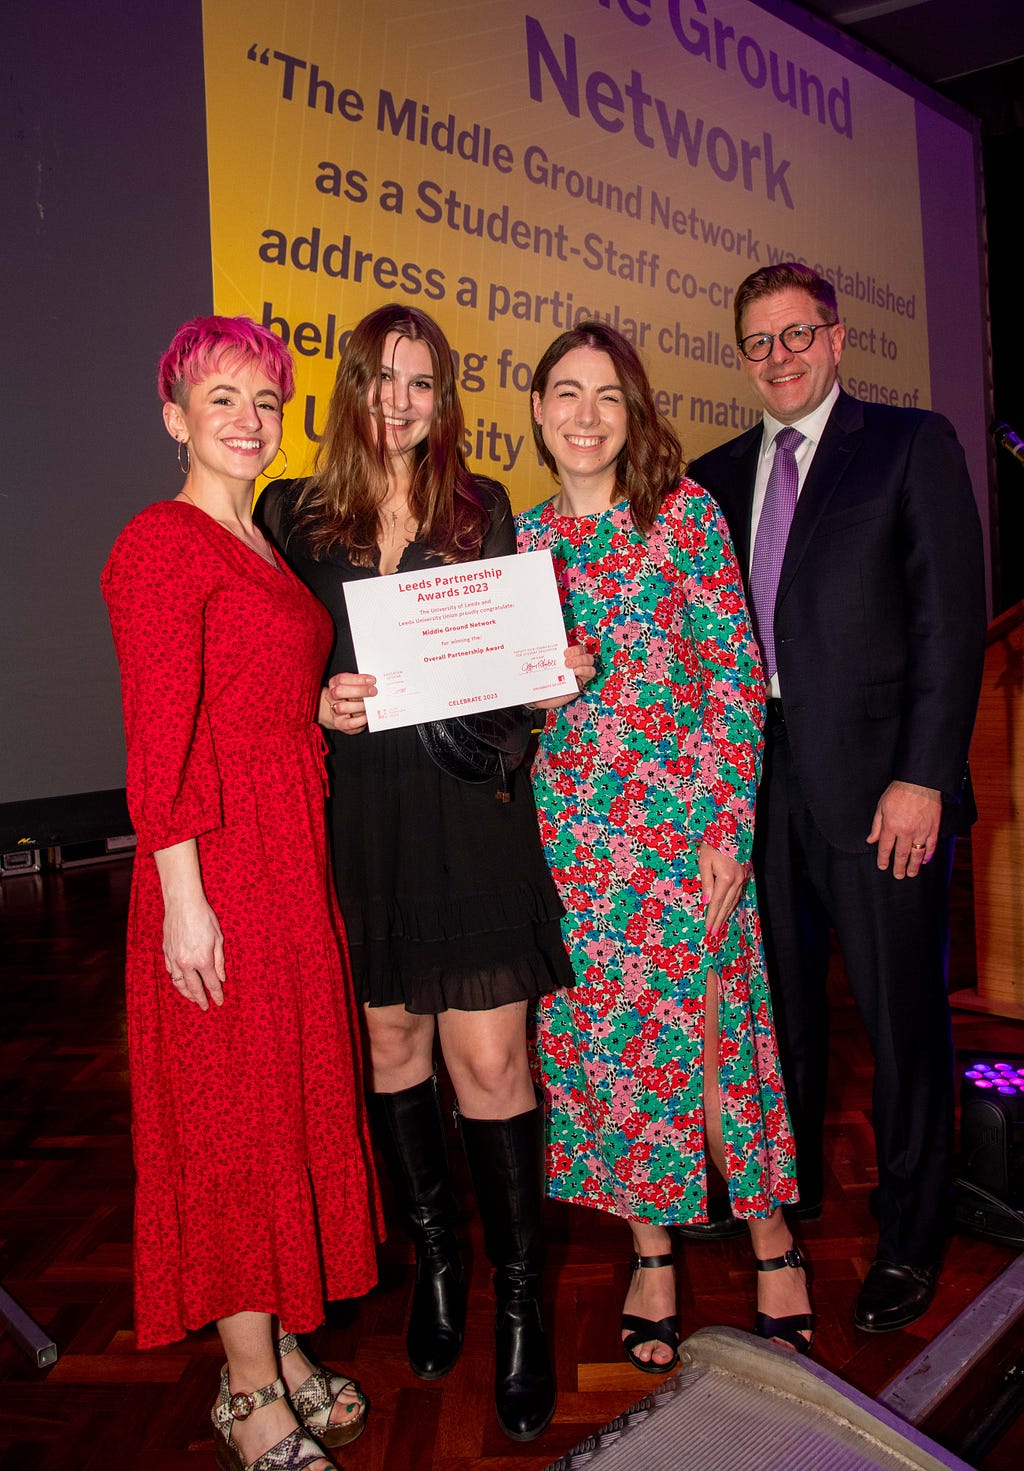 Lauren (Student Experience Officer), Zofia (Middle Ground Network Engagement Coordinator), Laura (Student Success Officer) and Jeff (DVC Student Education) stood on the stage at the Partnership Awards after receiving the Overall Partnership Award